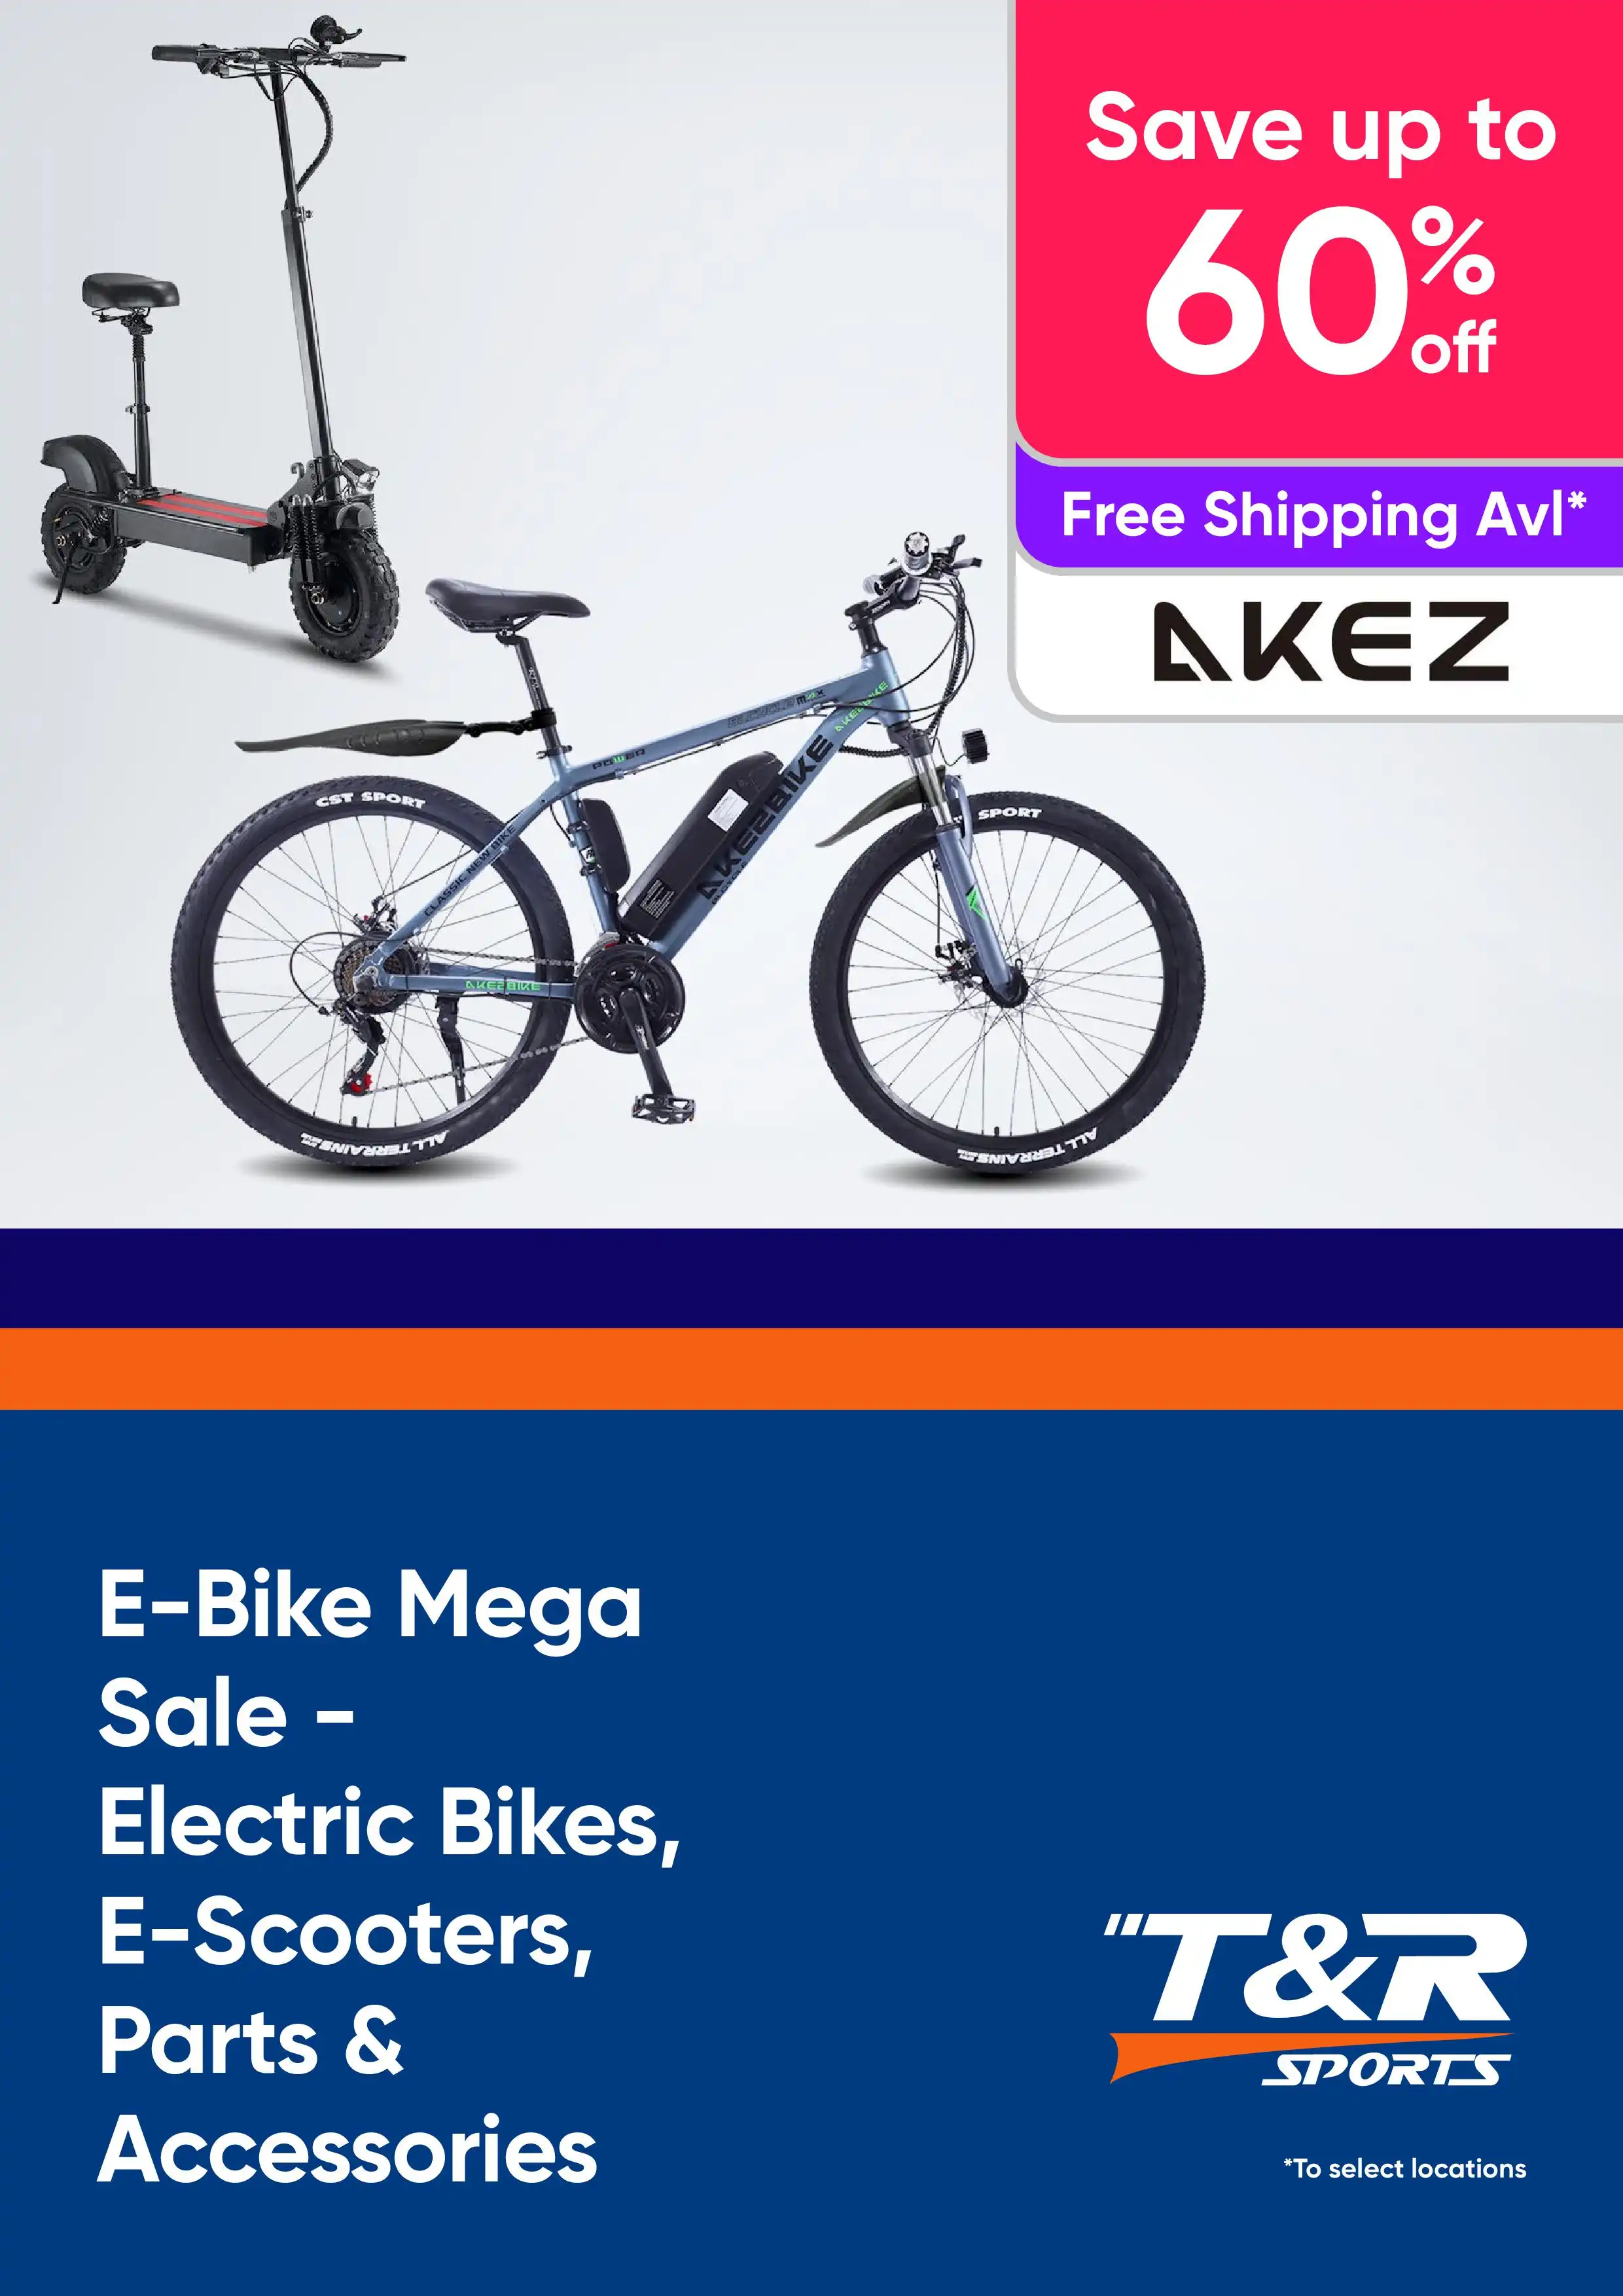 E-Bike Mega Sale - Up to 60% Off Electric Bikes, E-Scooters, Parts and Accessories